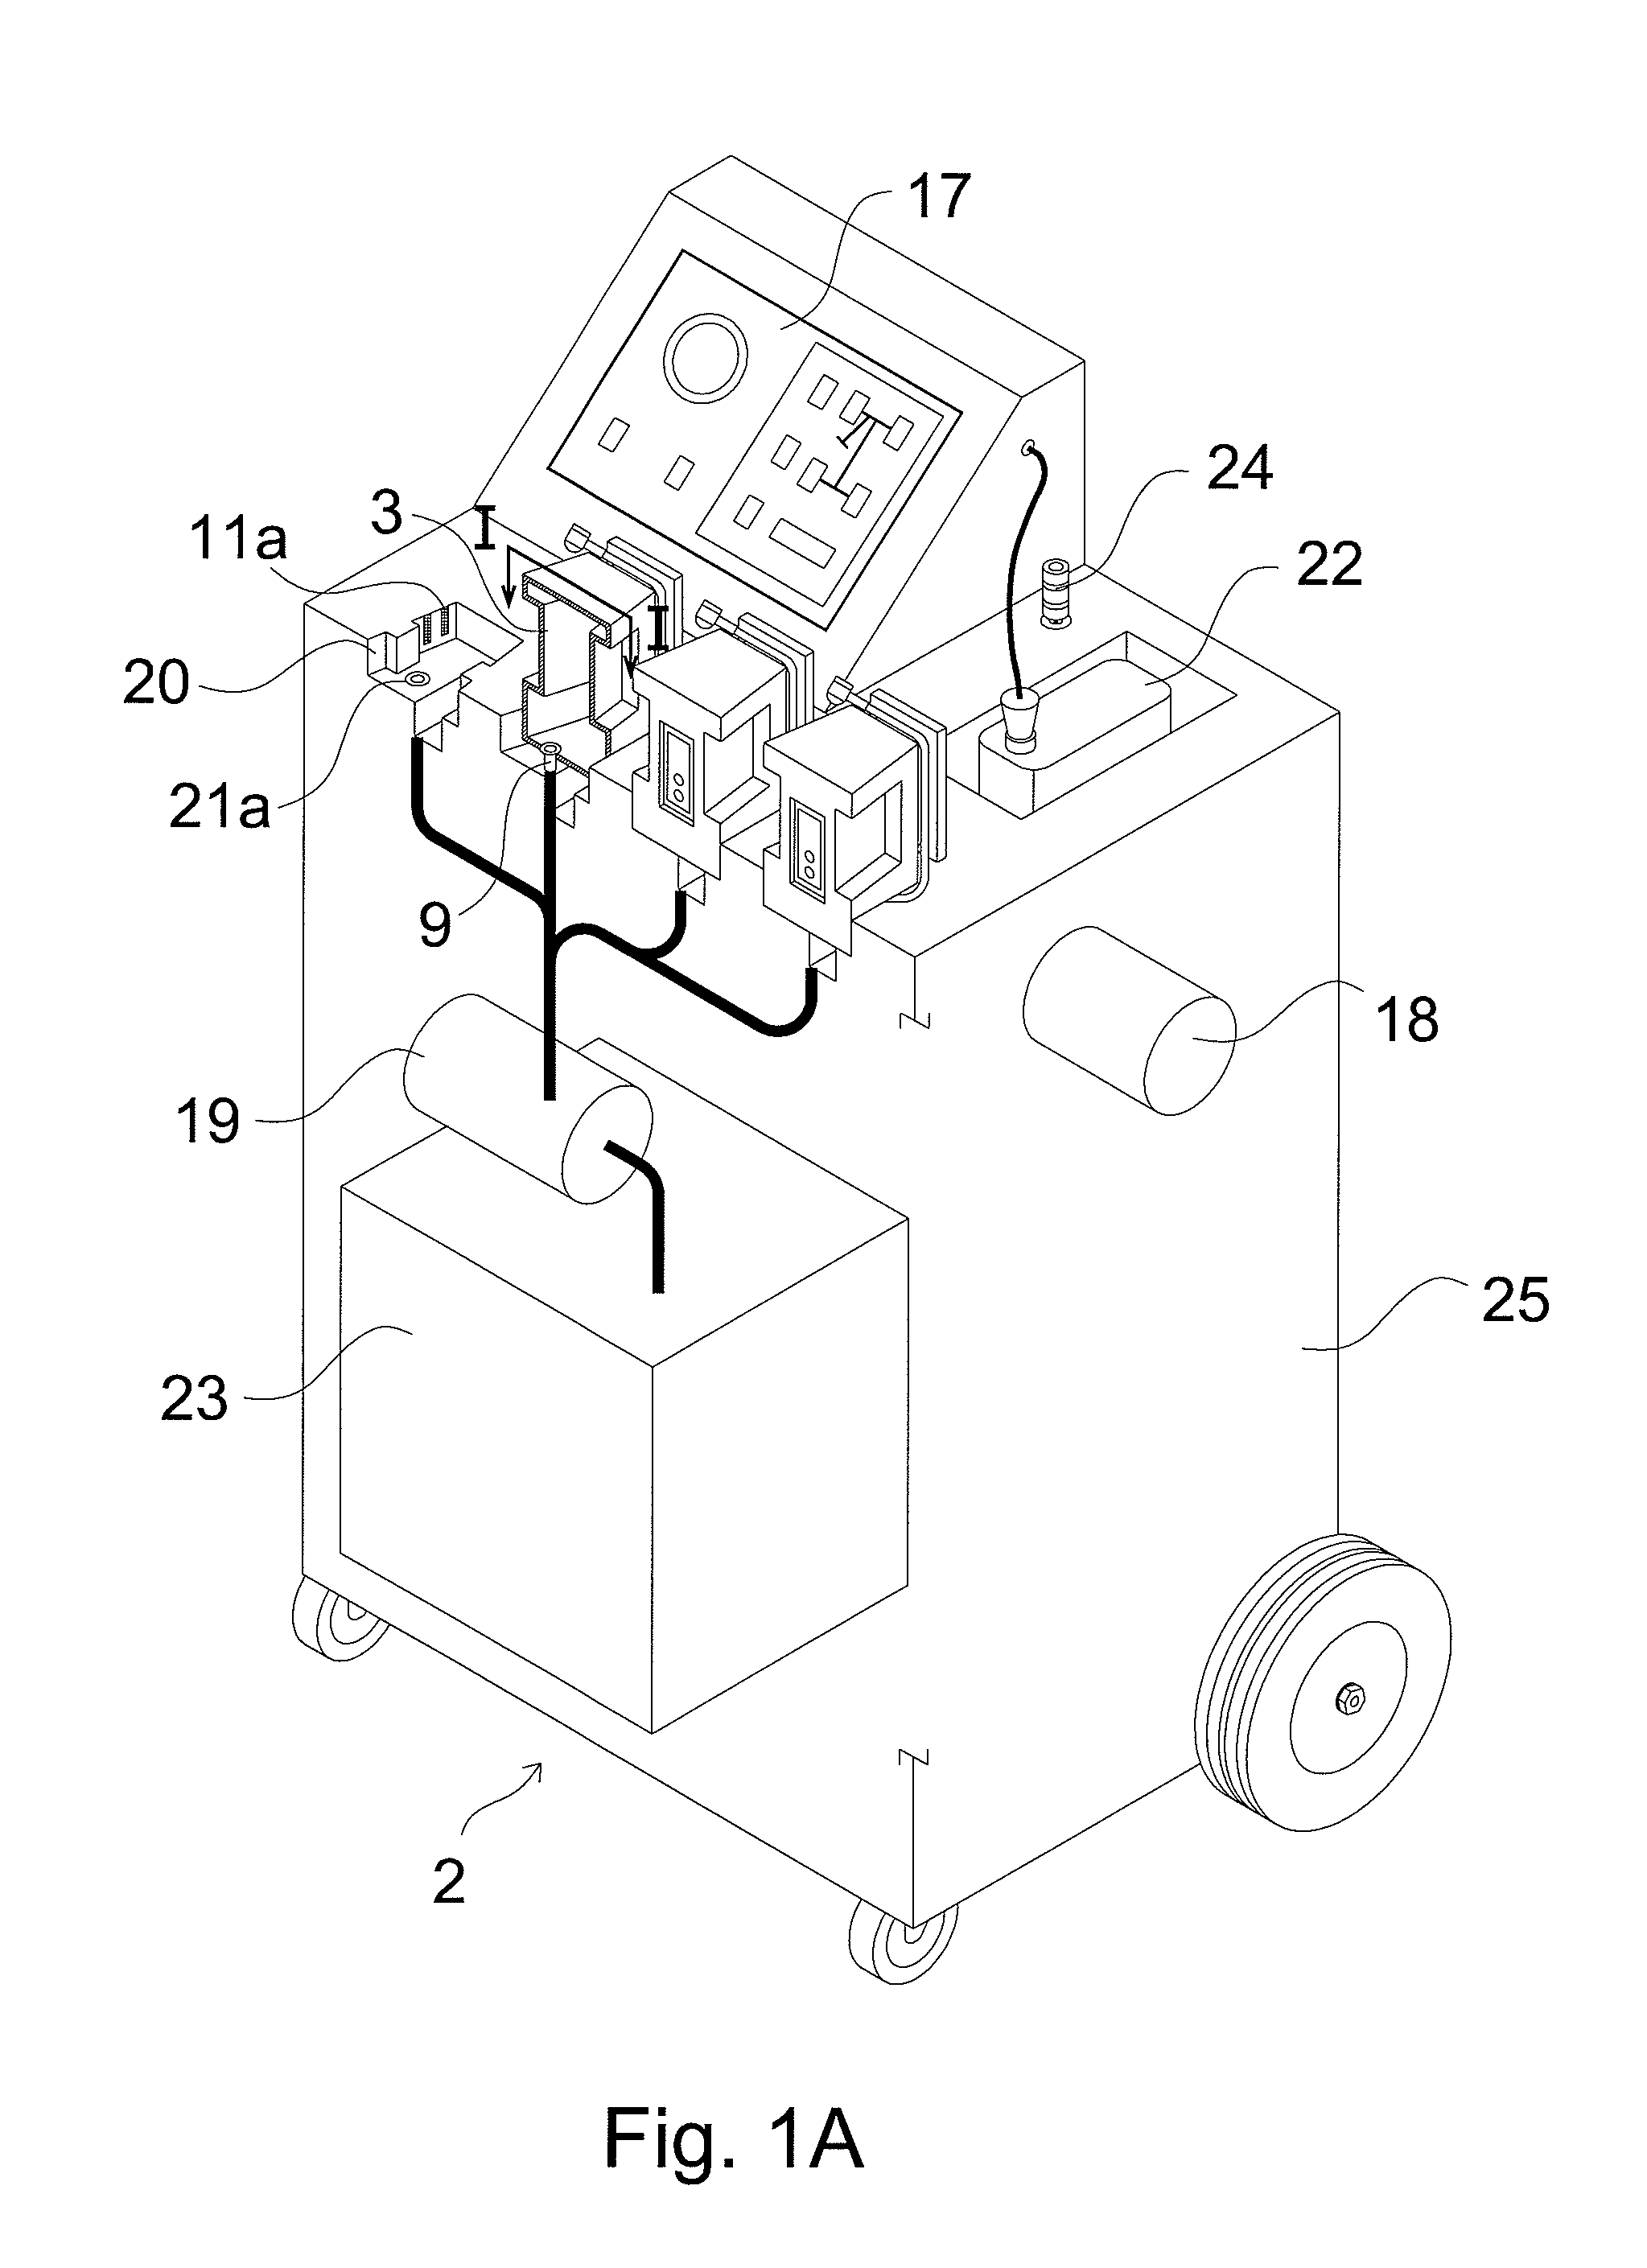 Automotive service equipment and method for brake fluid exchange with wireless brake bleeding system